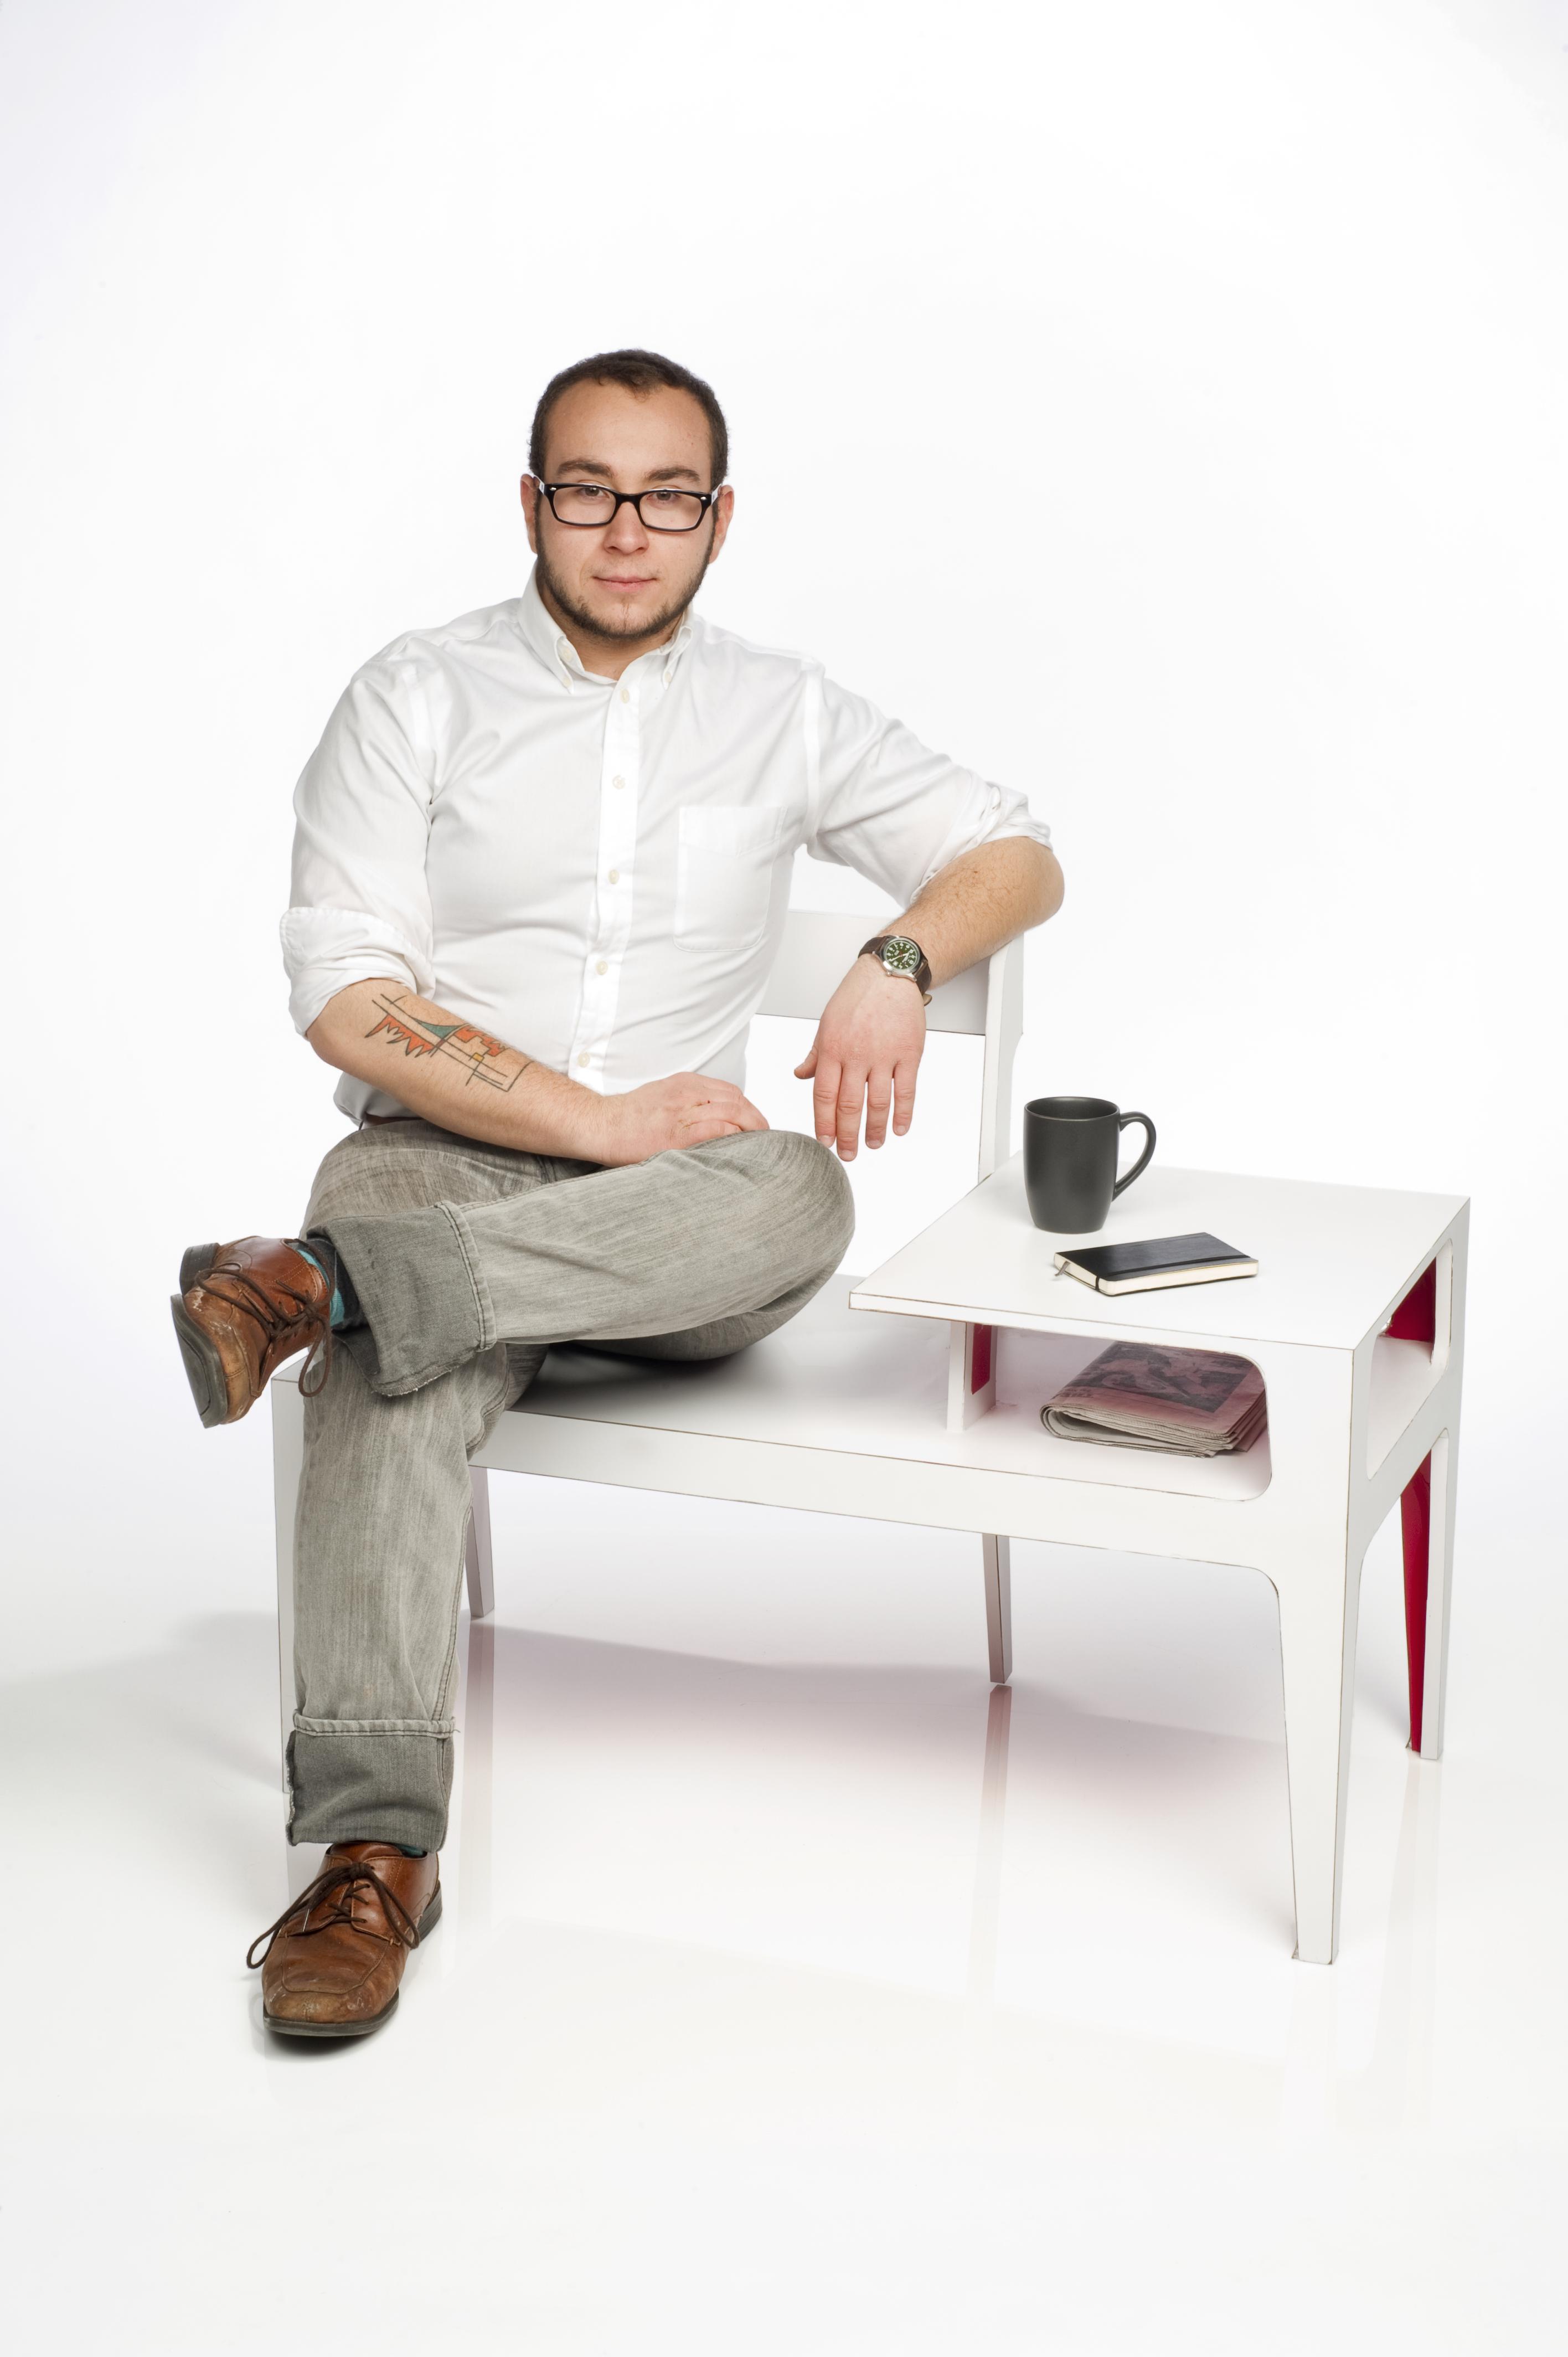 A person sits on a chair-desk hybrid design, resting his coffee and phone on the surface.